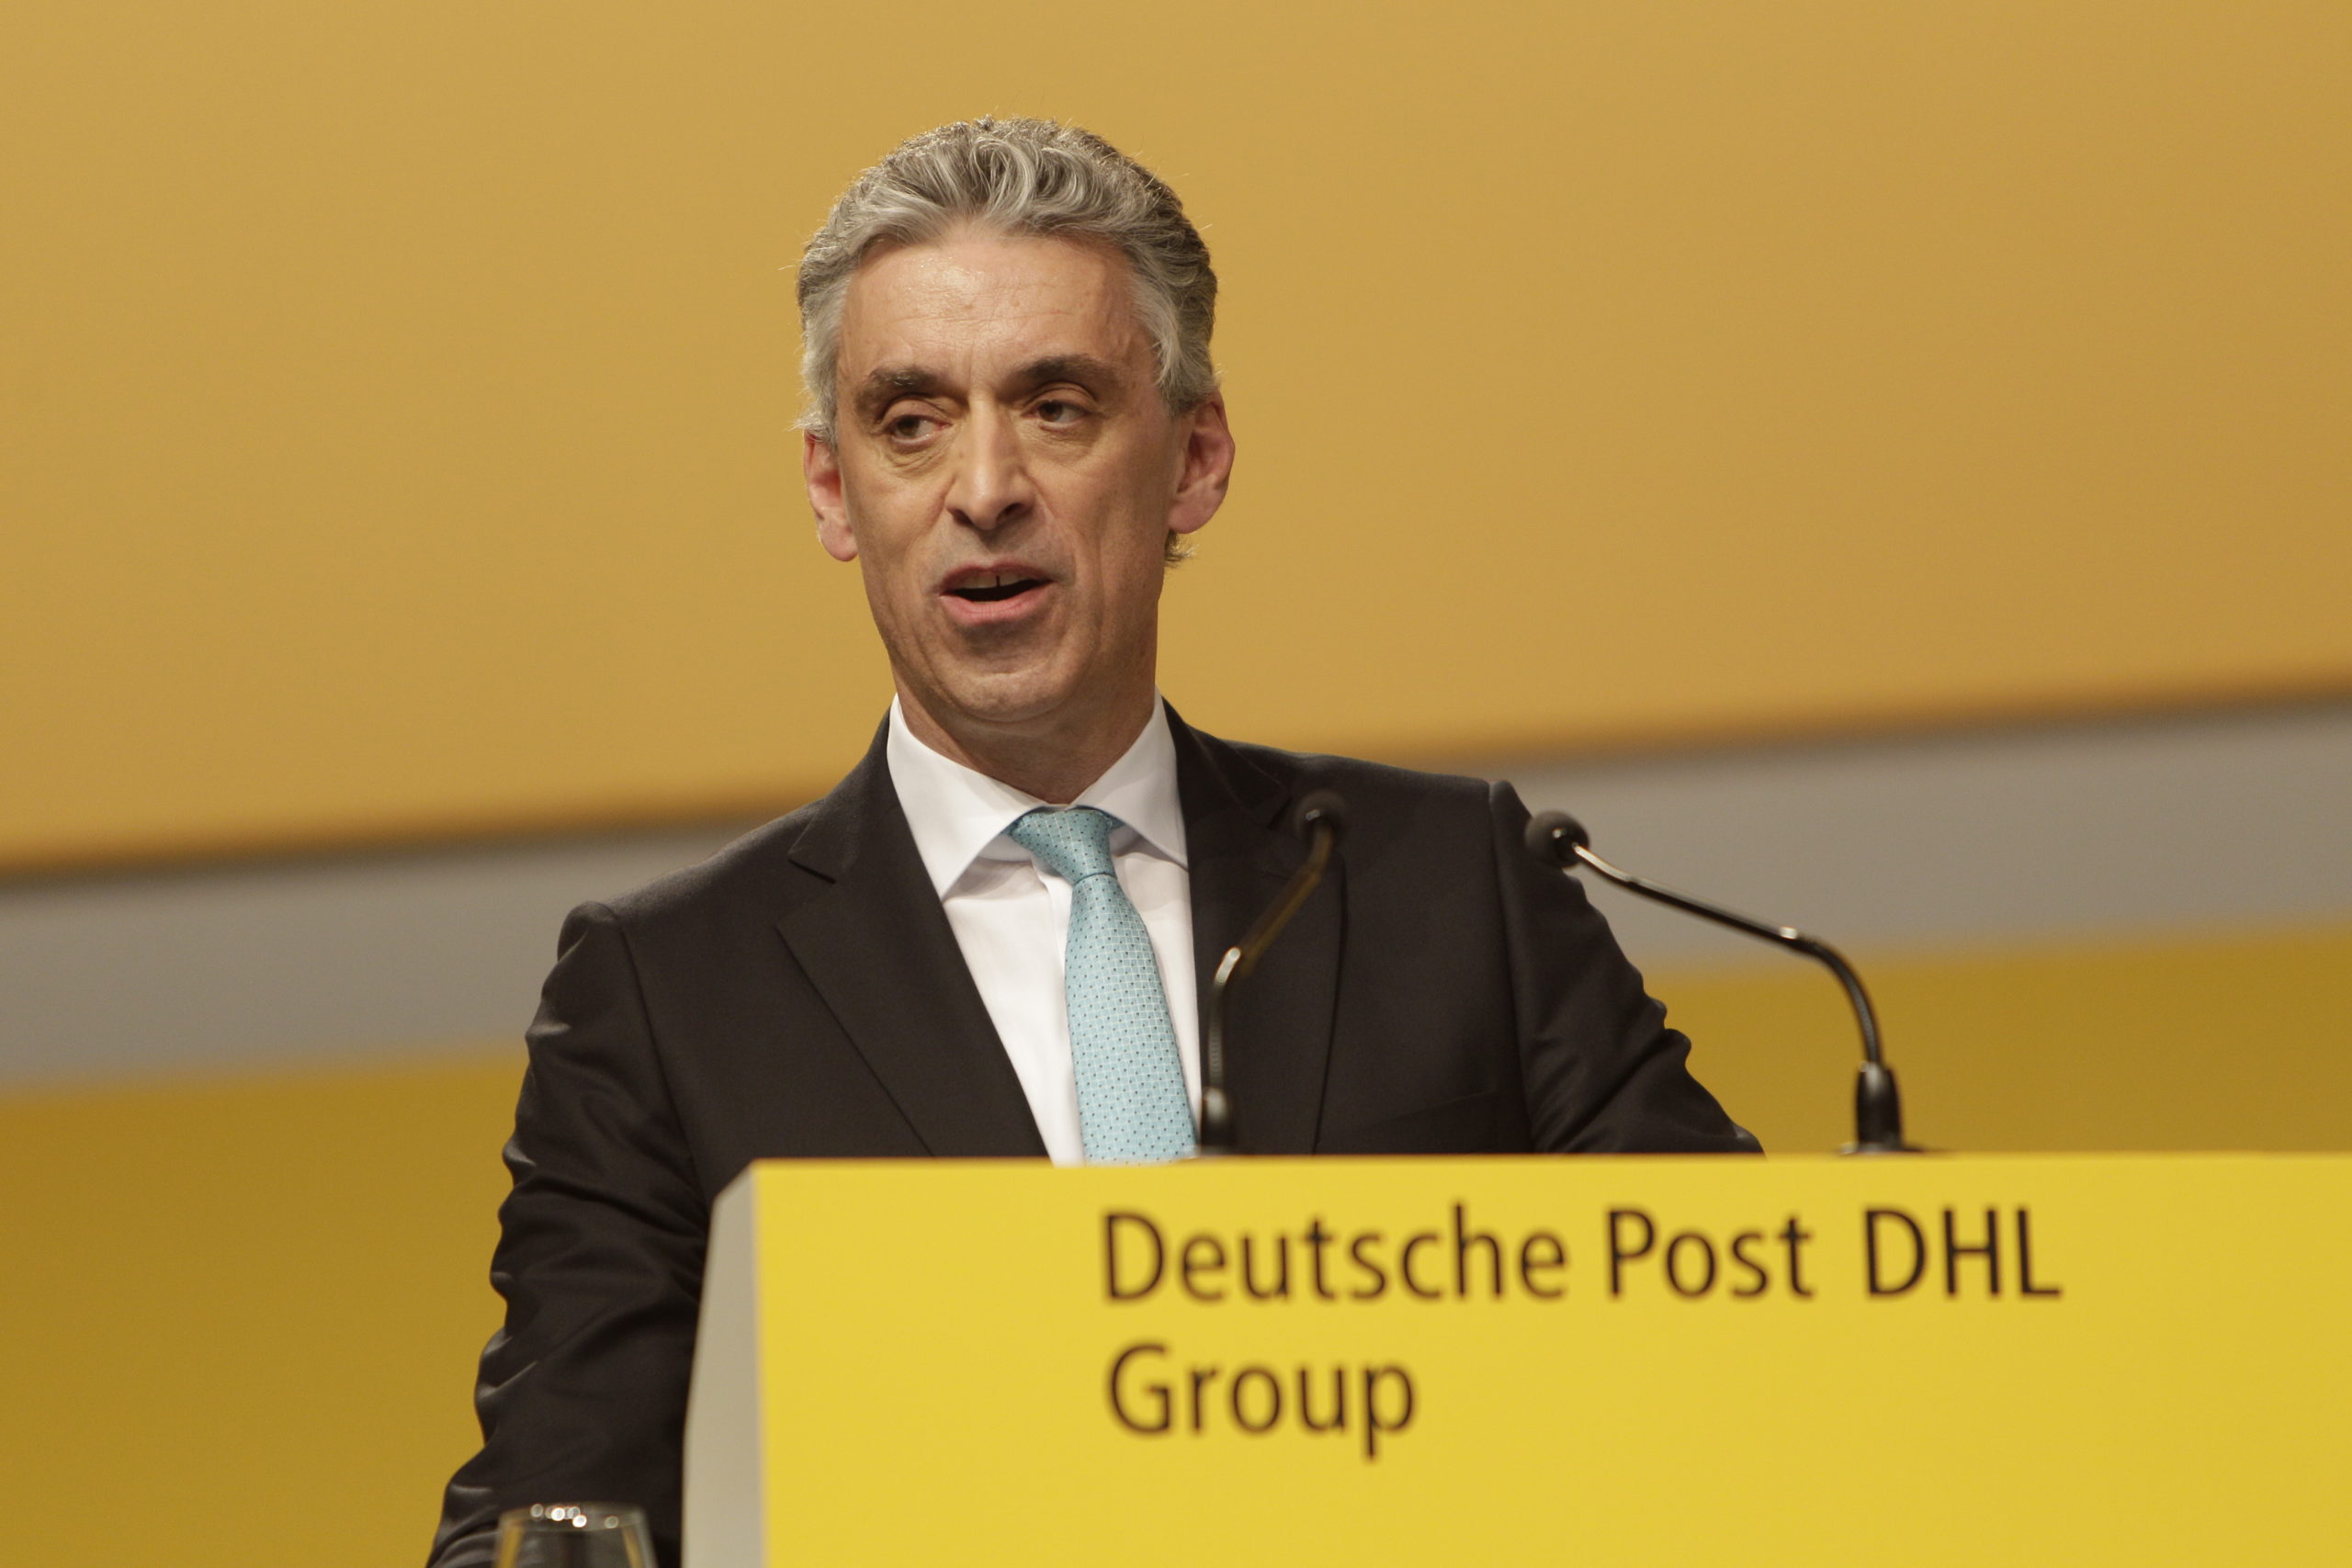 Frank Appel addressing DHL's Annual General Meeting